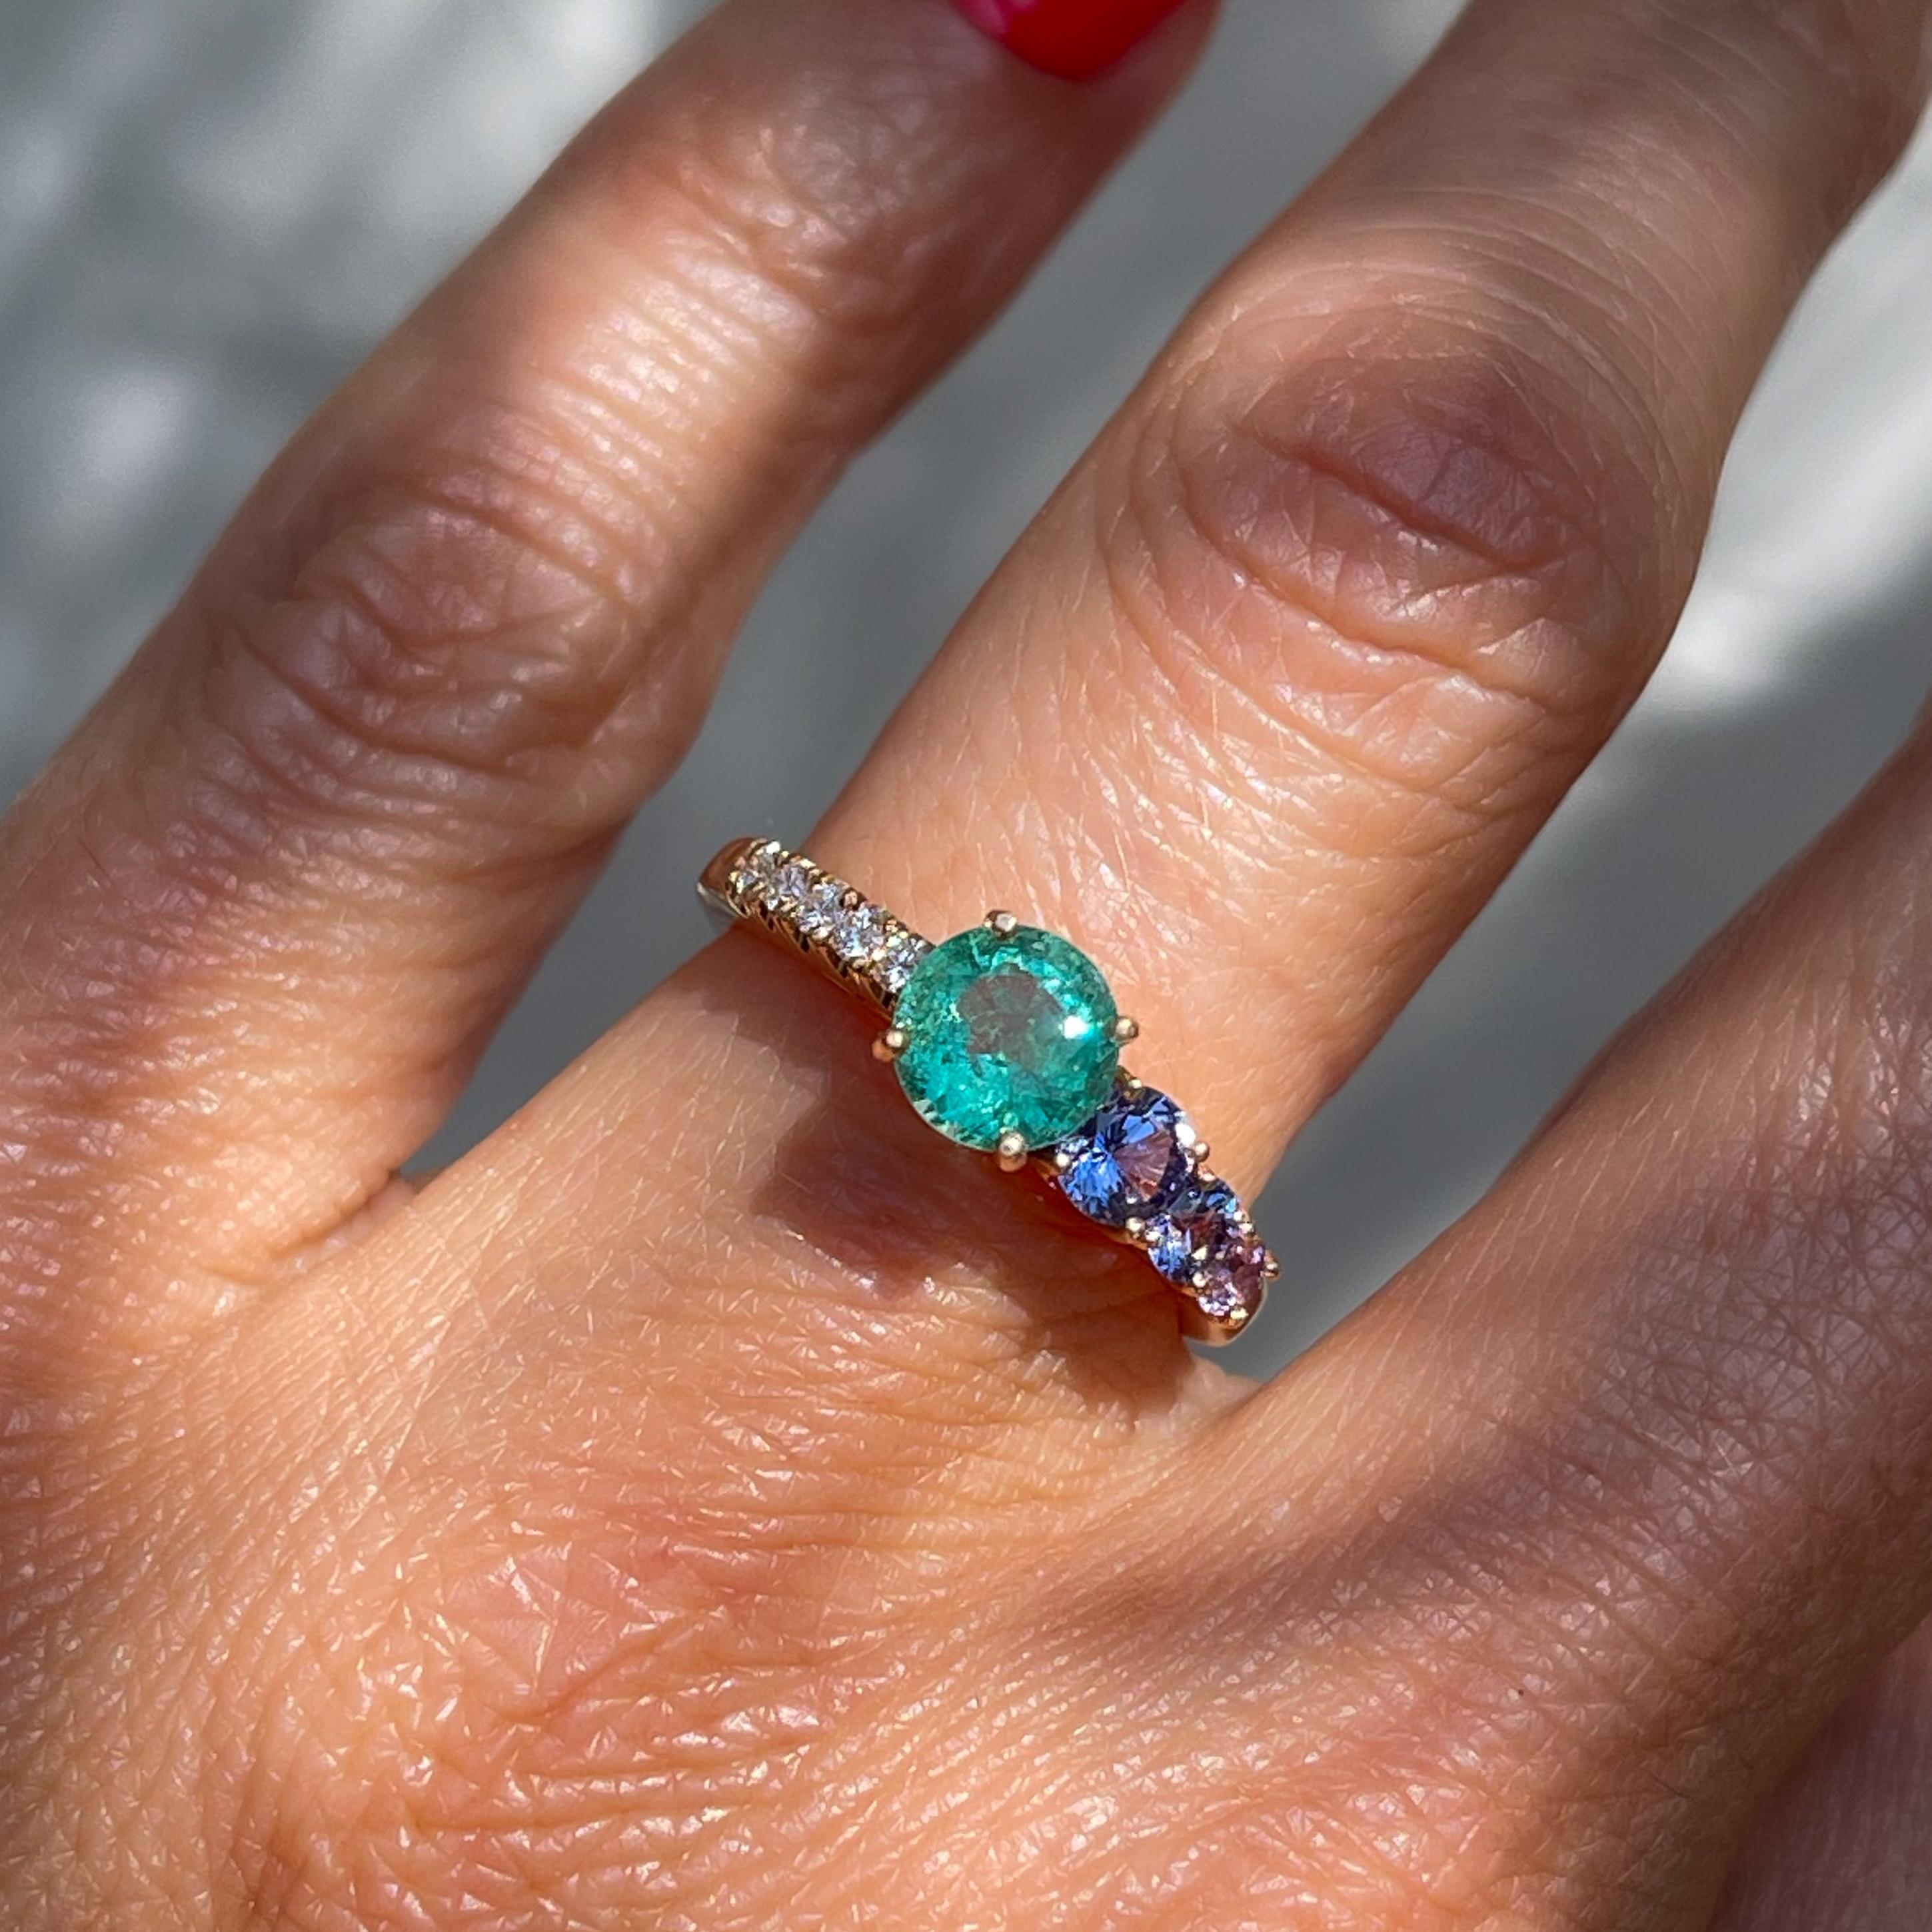 A tiered procession of exquisite color adorns this Colombian Emerald Ring. Flanked by purple sapphires and pave diamonds, the balanced asymmetry around the stunning green gem exacts a sublimely unique emerald ring design. The soothing vision,